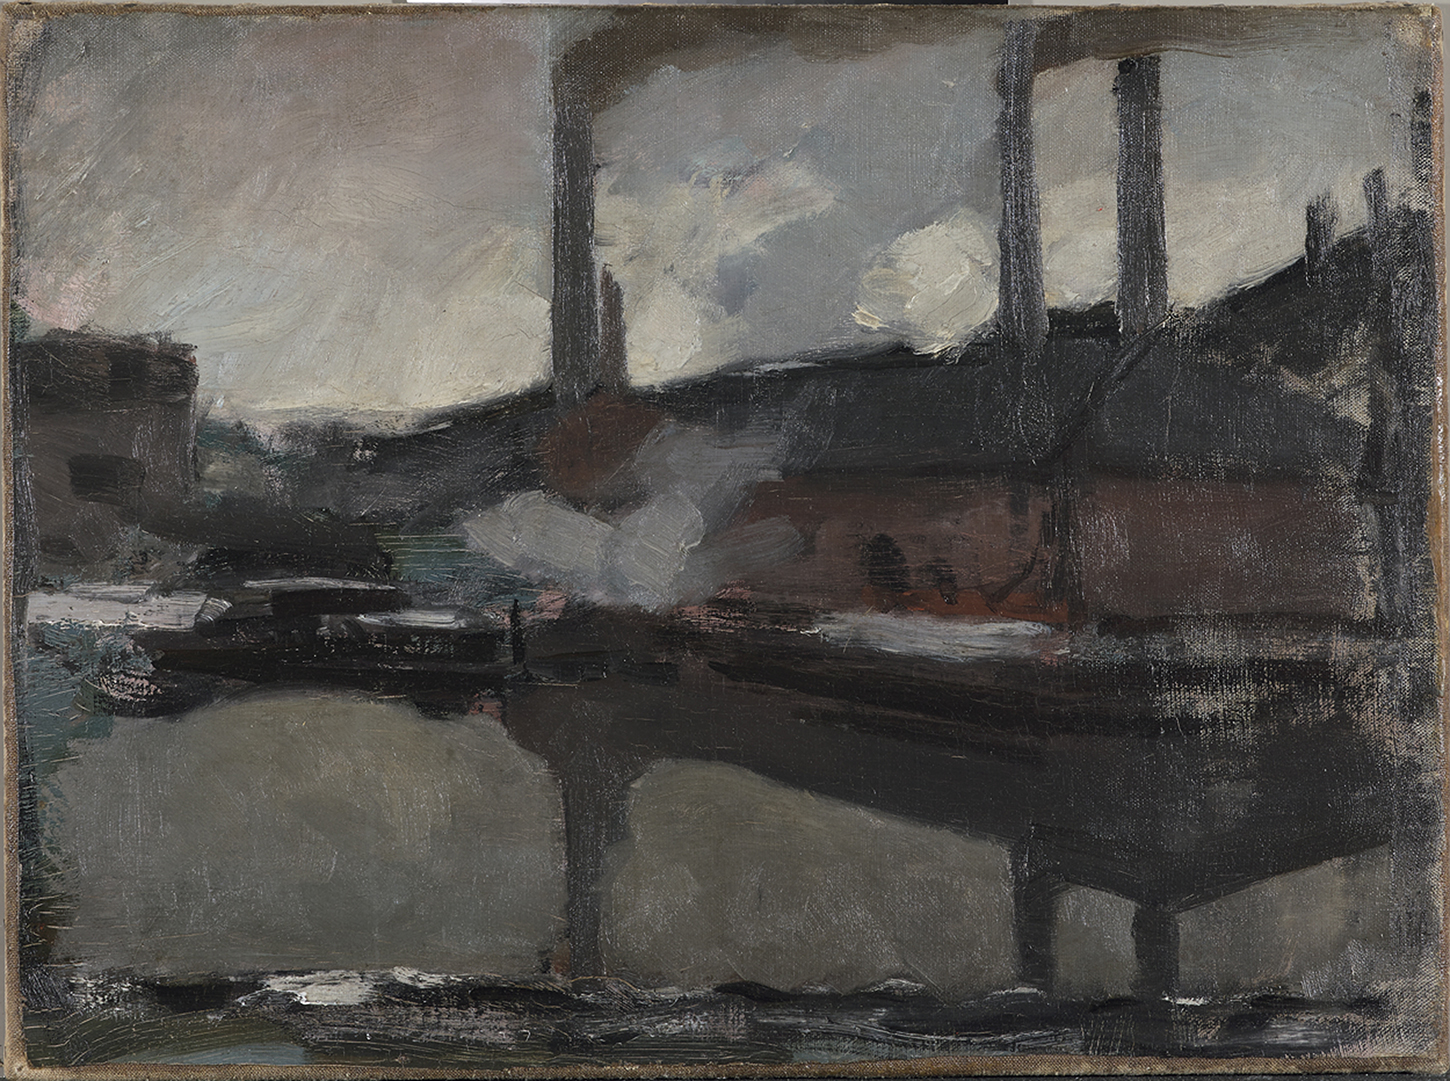 An industrial scene, with tall chimney stacks billowing out smoke, reflected in the water below